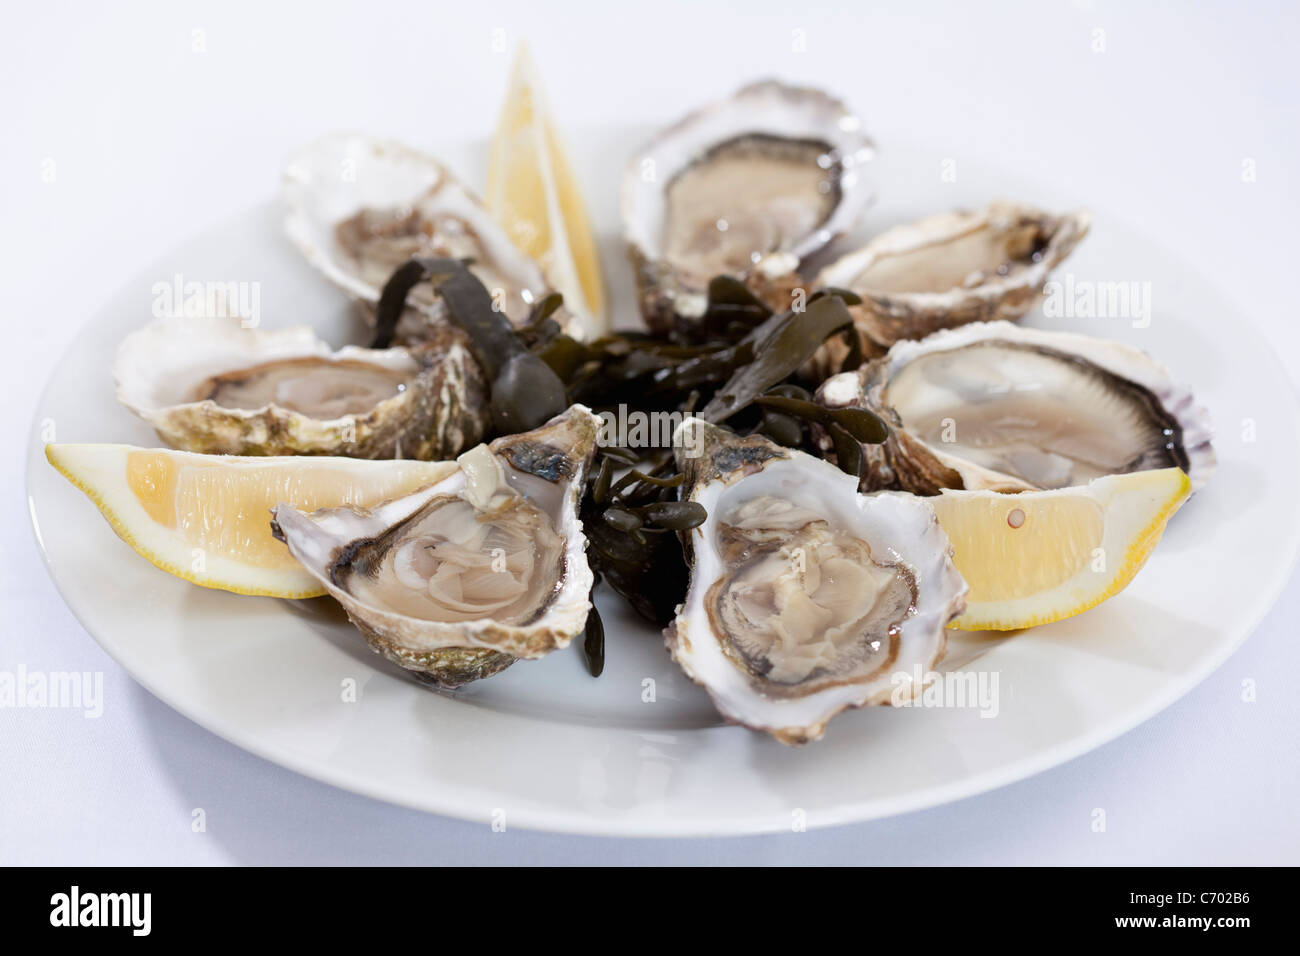 Close up of plate of oysters Stock Photo